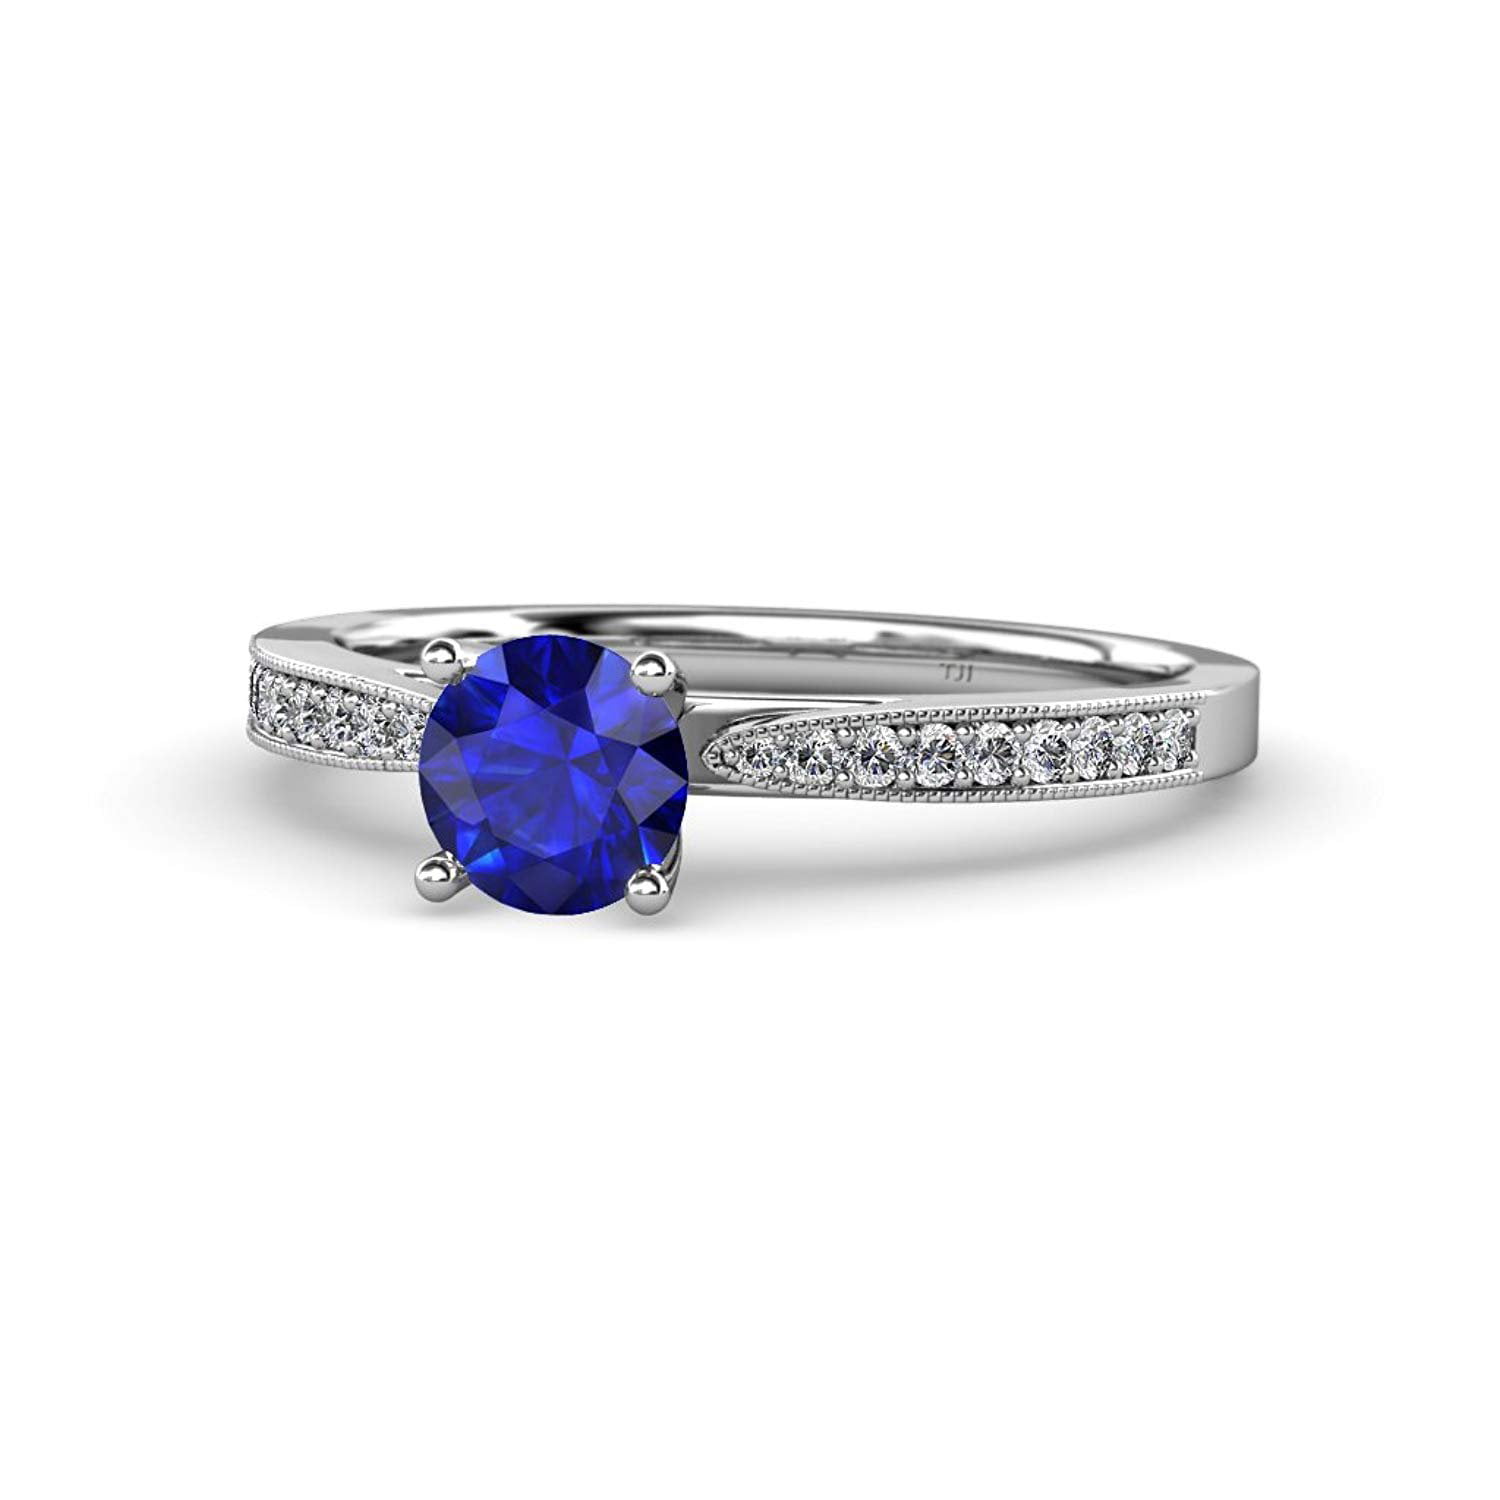 Blue Sapphire and Diamond Engagement Ring with Milgrain Work 1.13 cttw ...